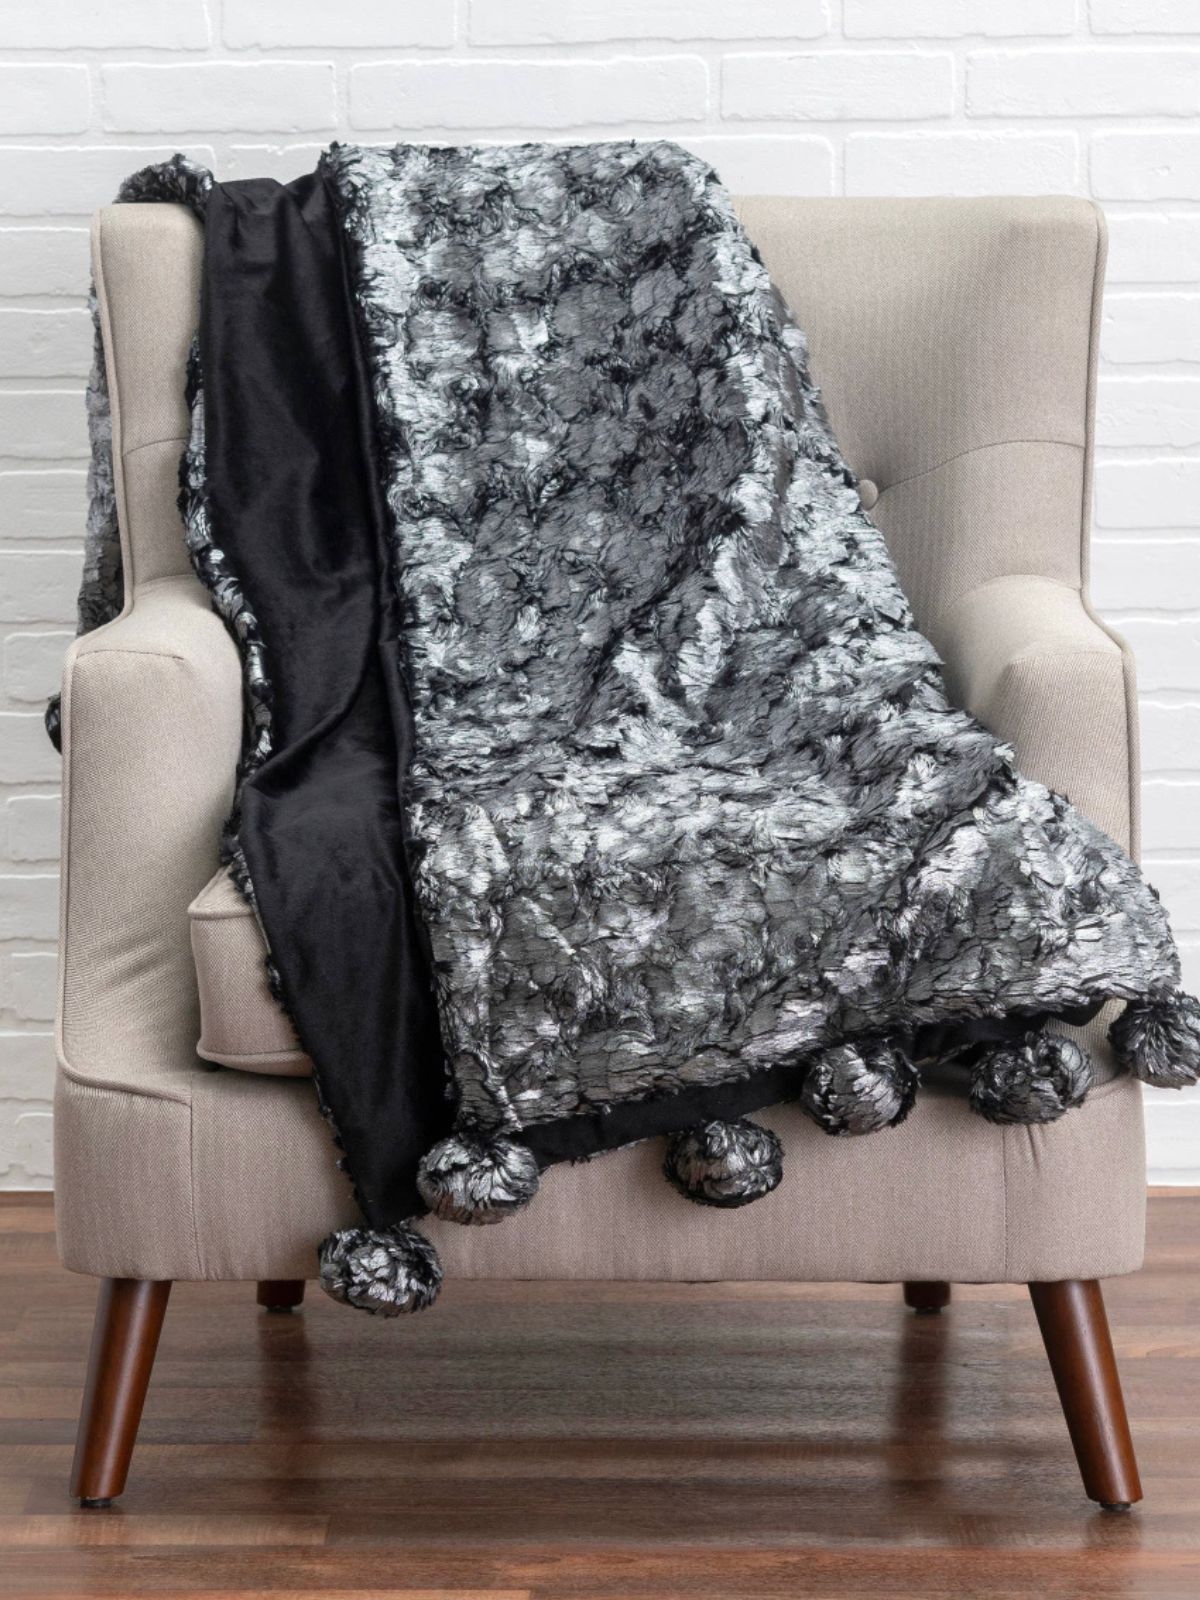 The Sable throw is a luxurious feather like faux fur with a silver metallic look, 50W x 60L. 